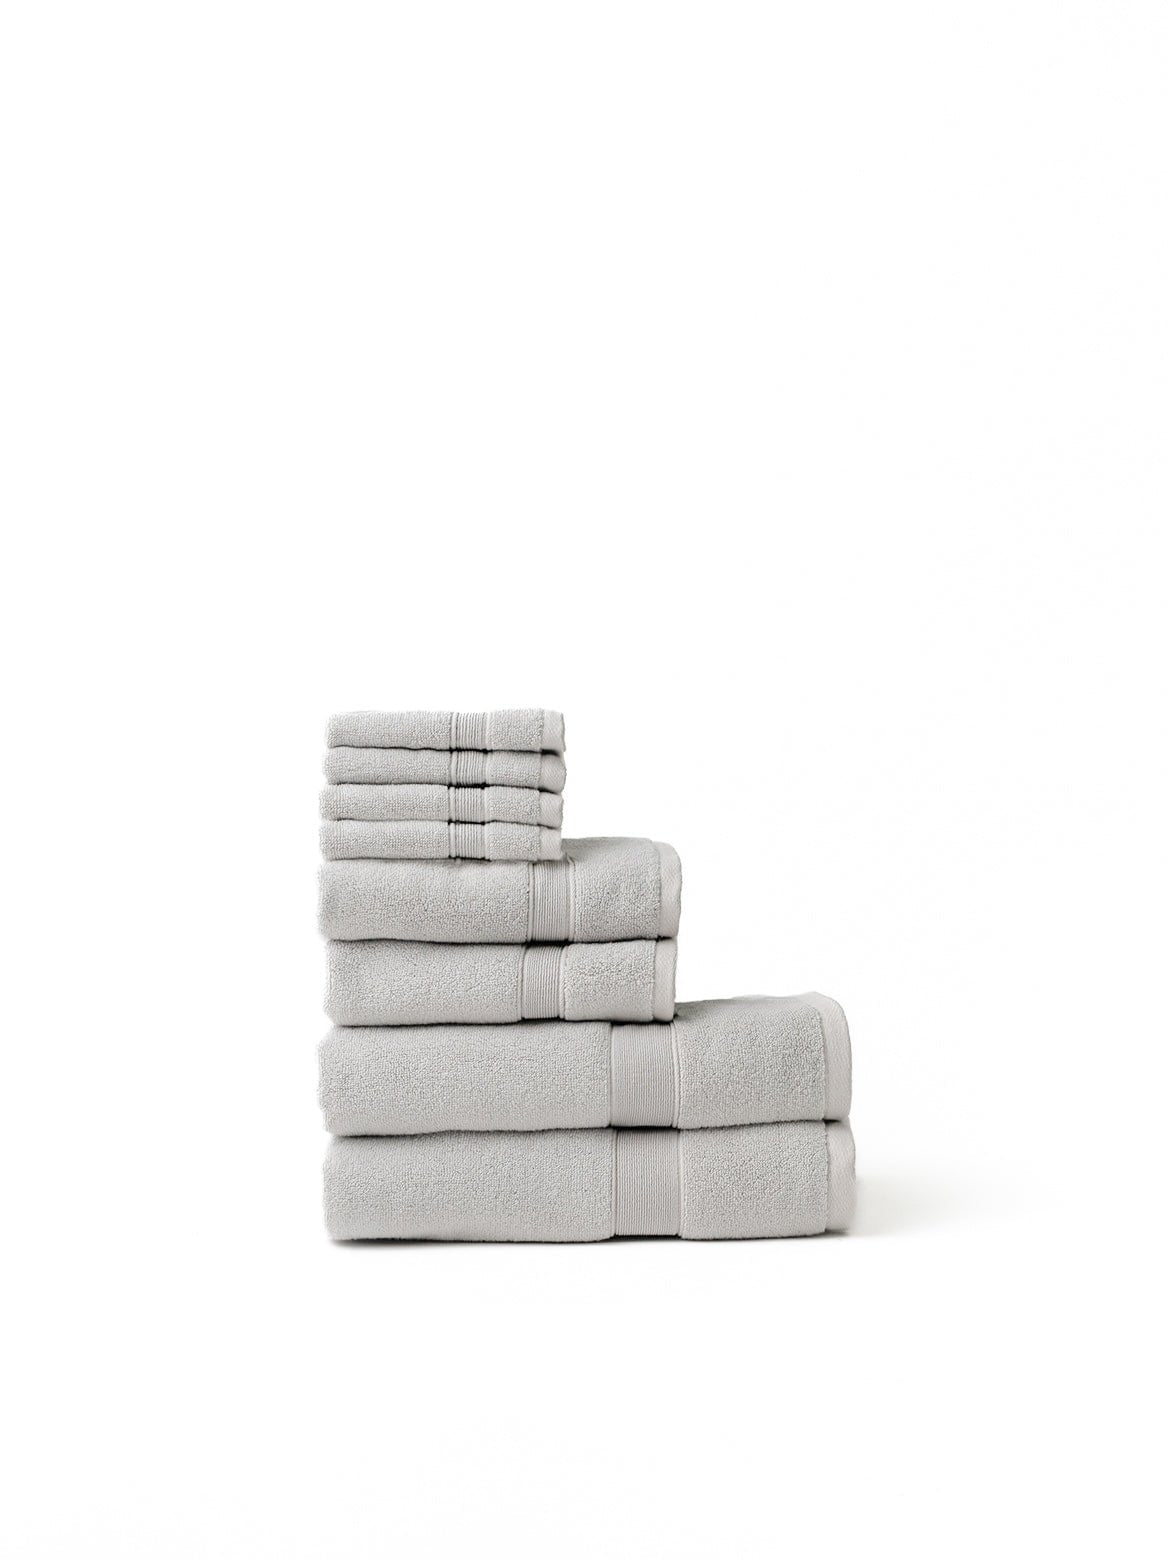 Light grey luxe bath towel set folded with white background 